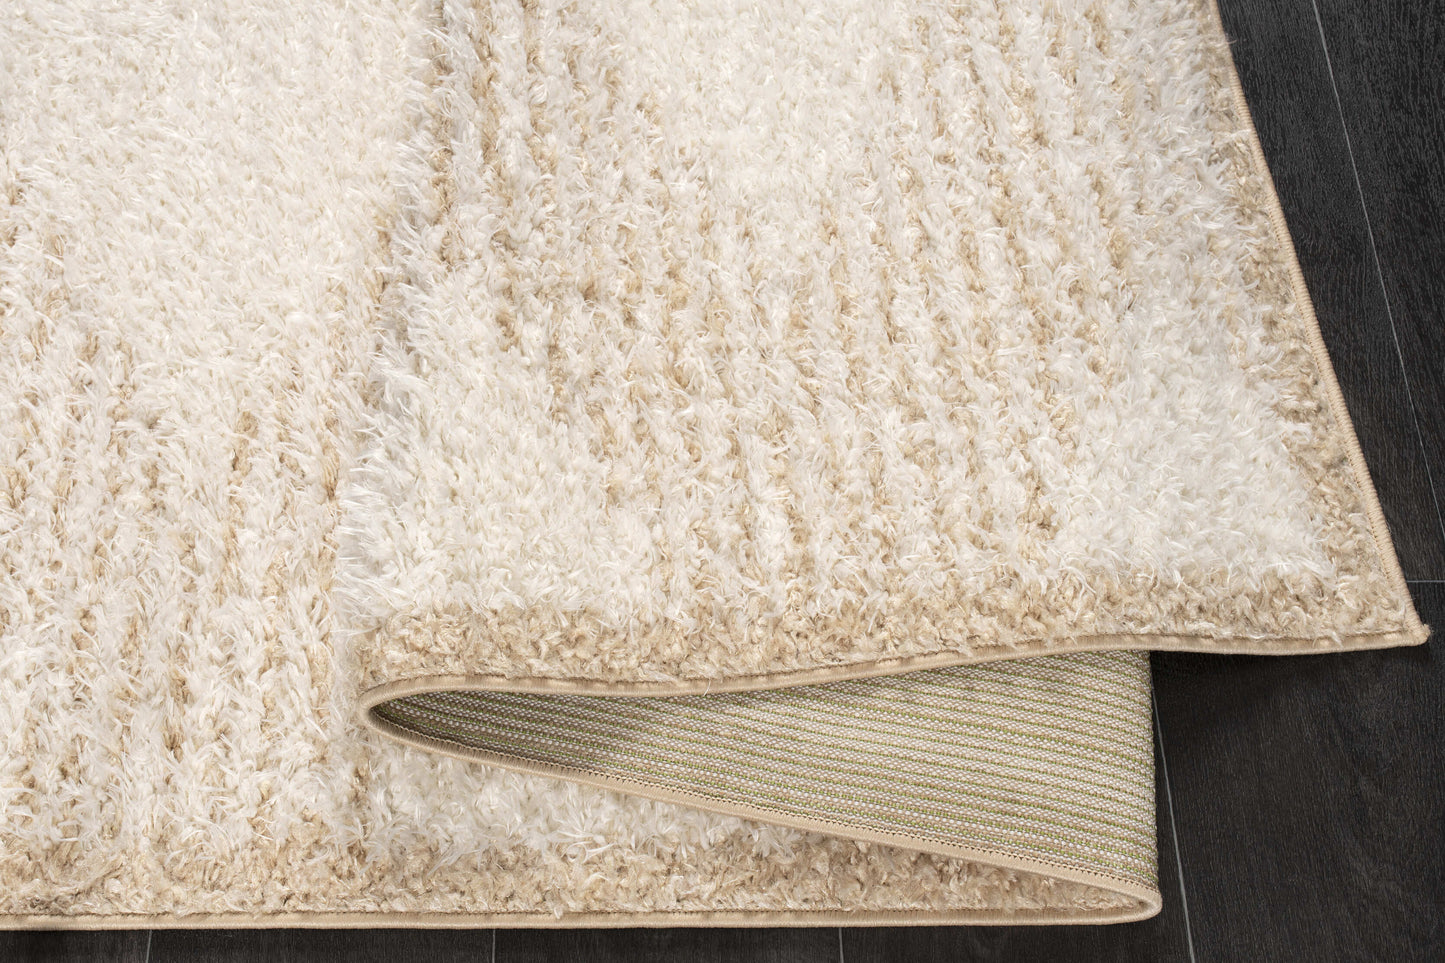 cream beige abstract fluffy thick shaggy area rug for living room bedroom 4x6, 4x5 ft Small Carpet, Home Office, Living Room, Bedroom